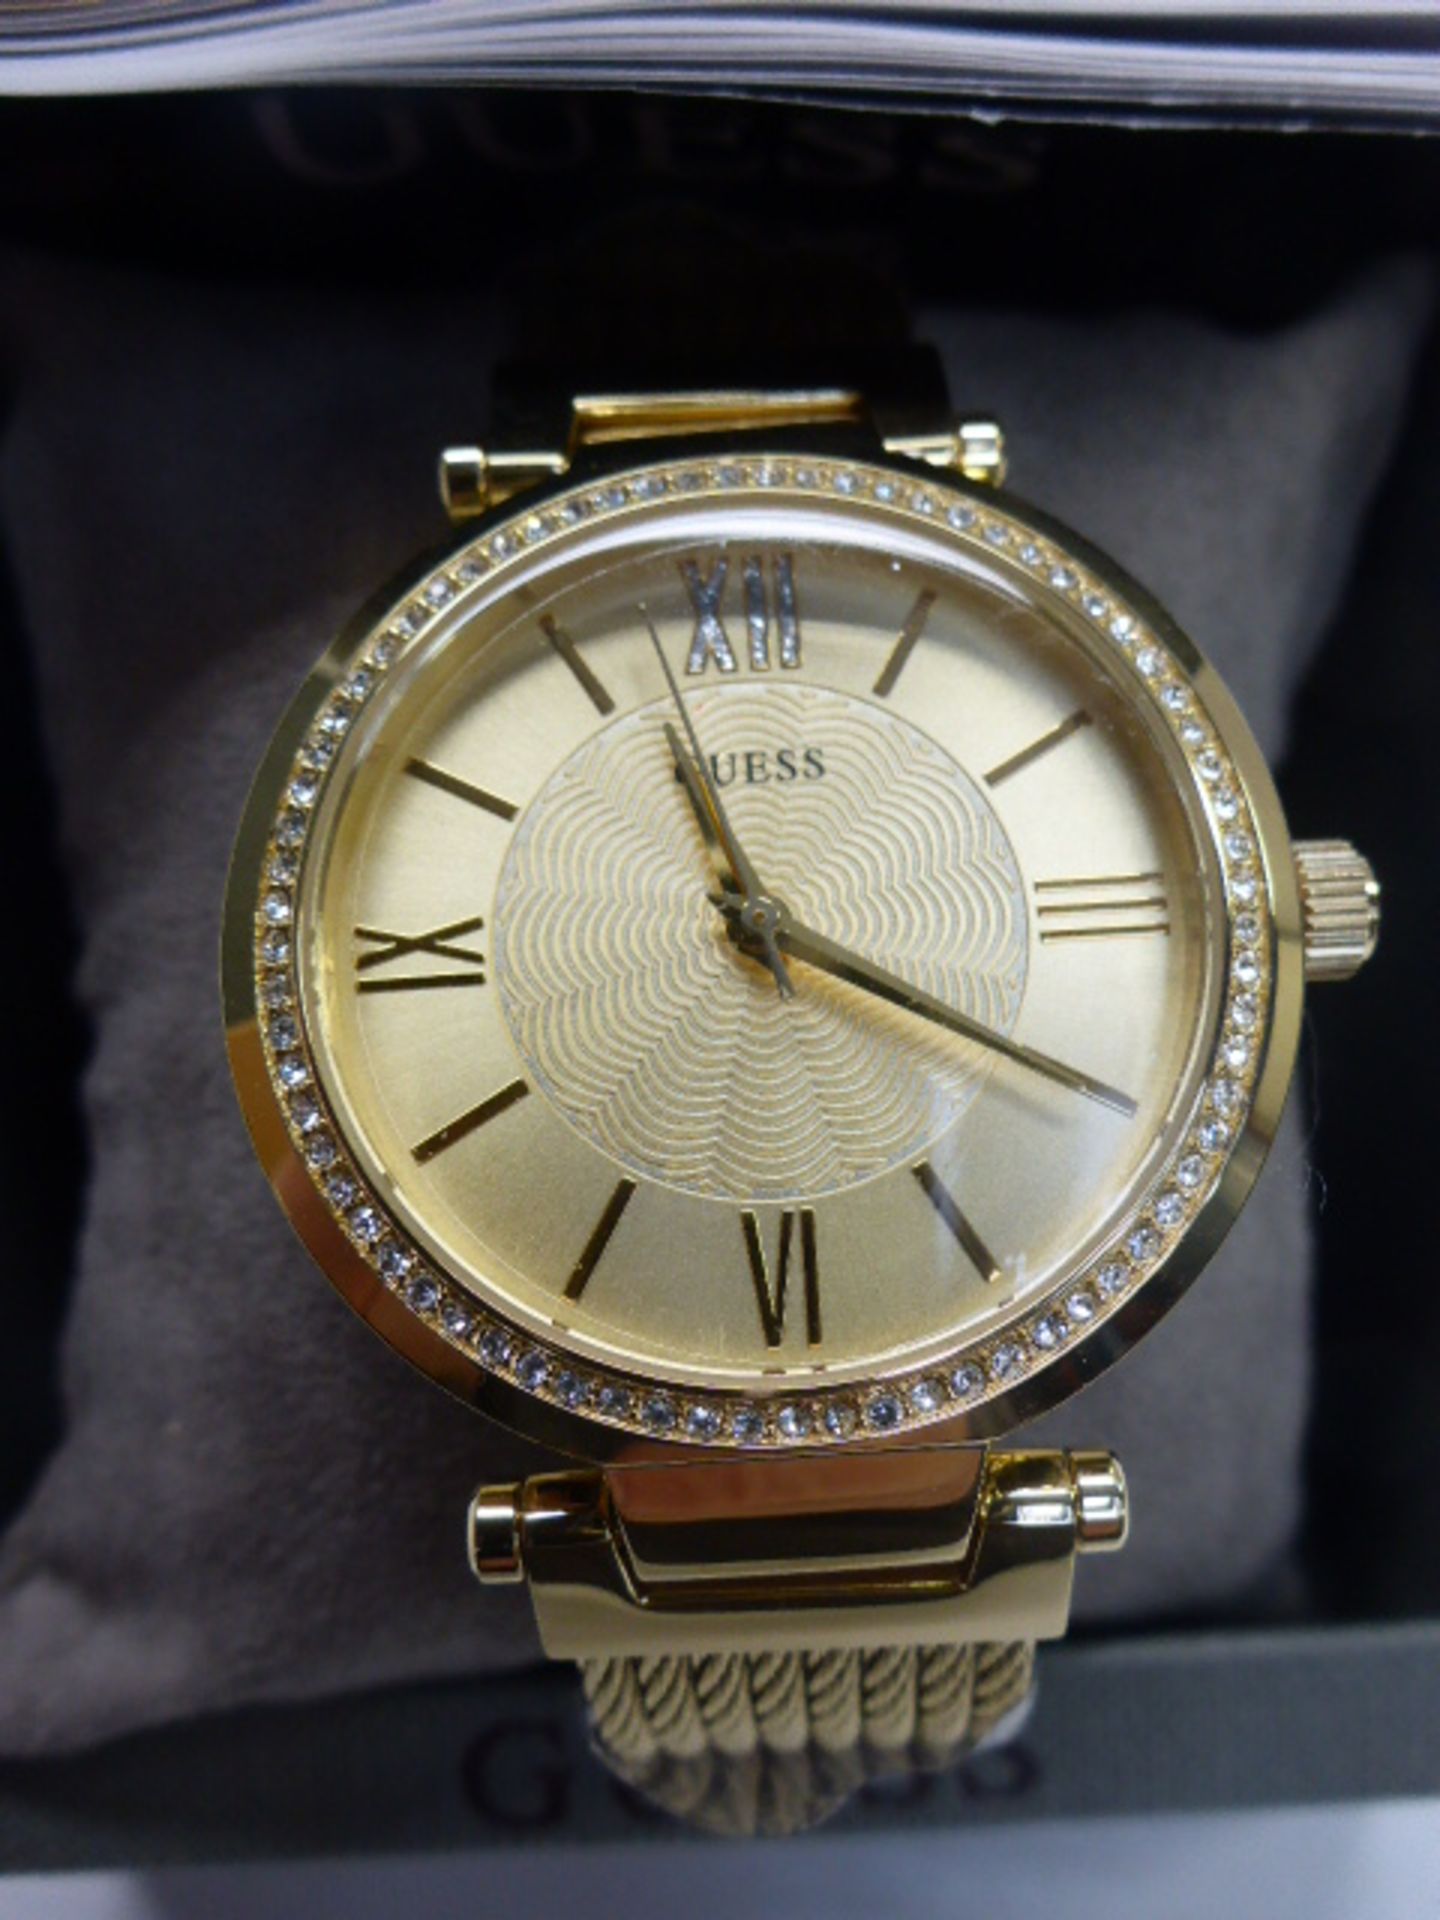 Guess ladies wristwatch in box